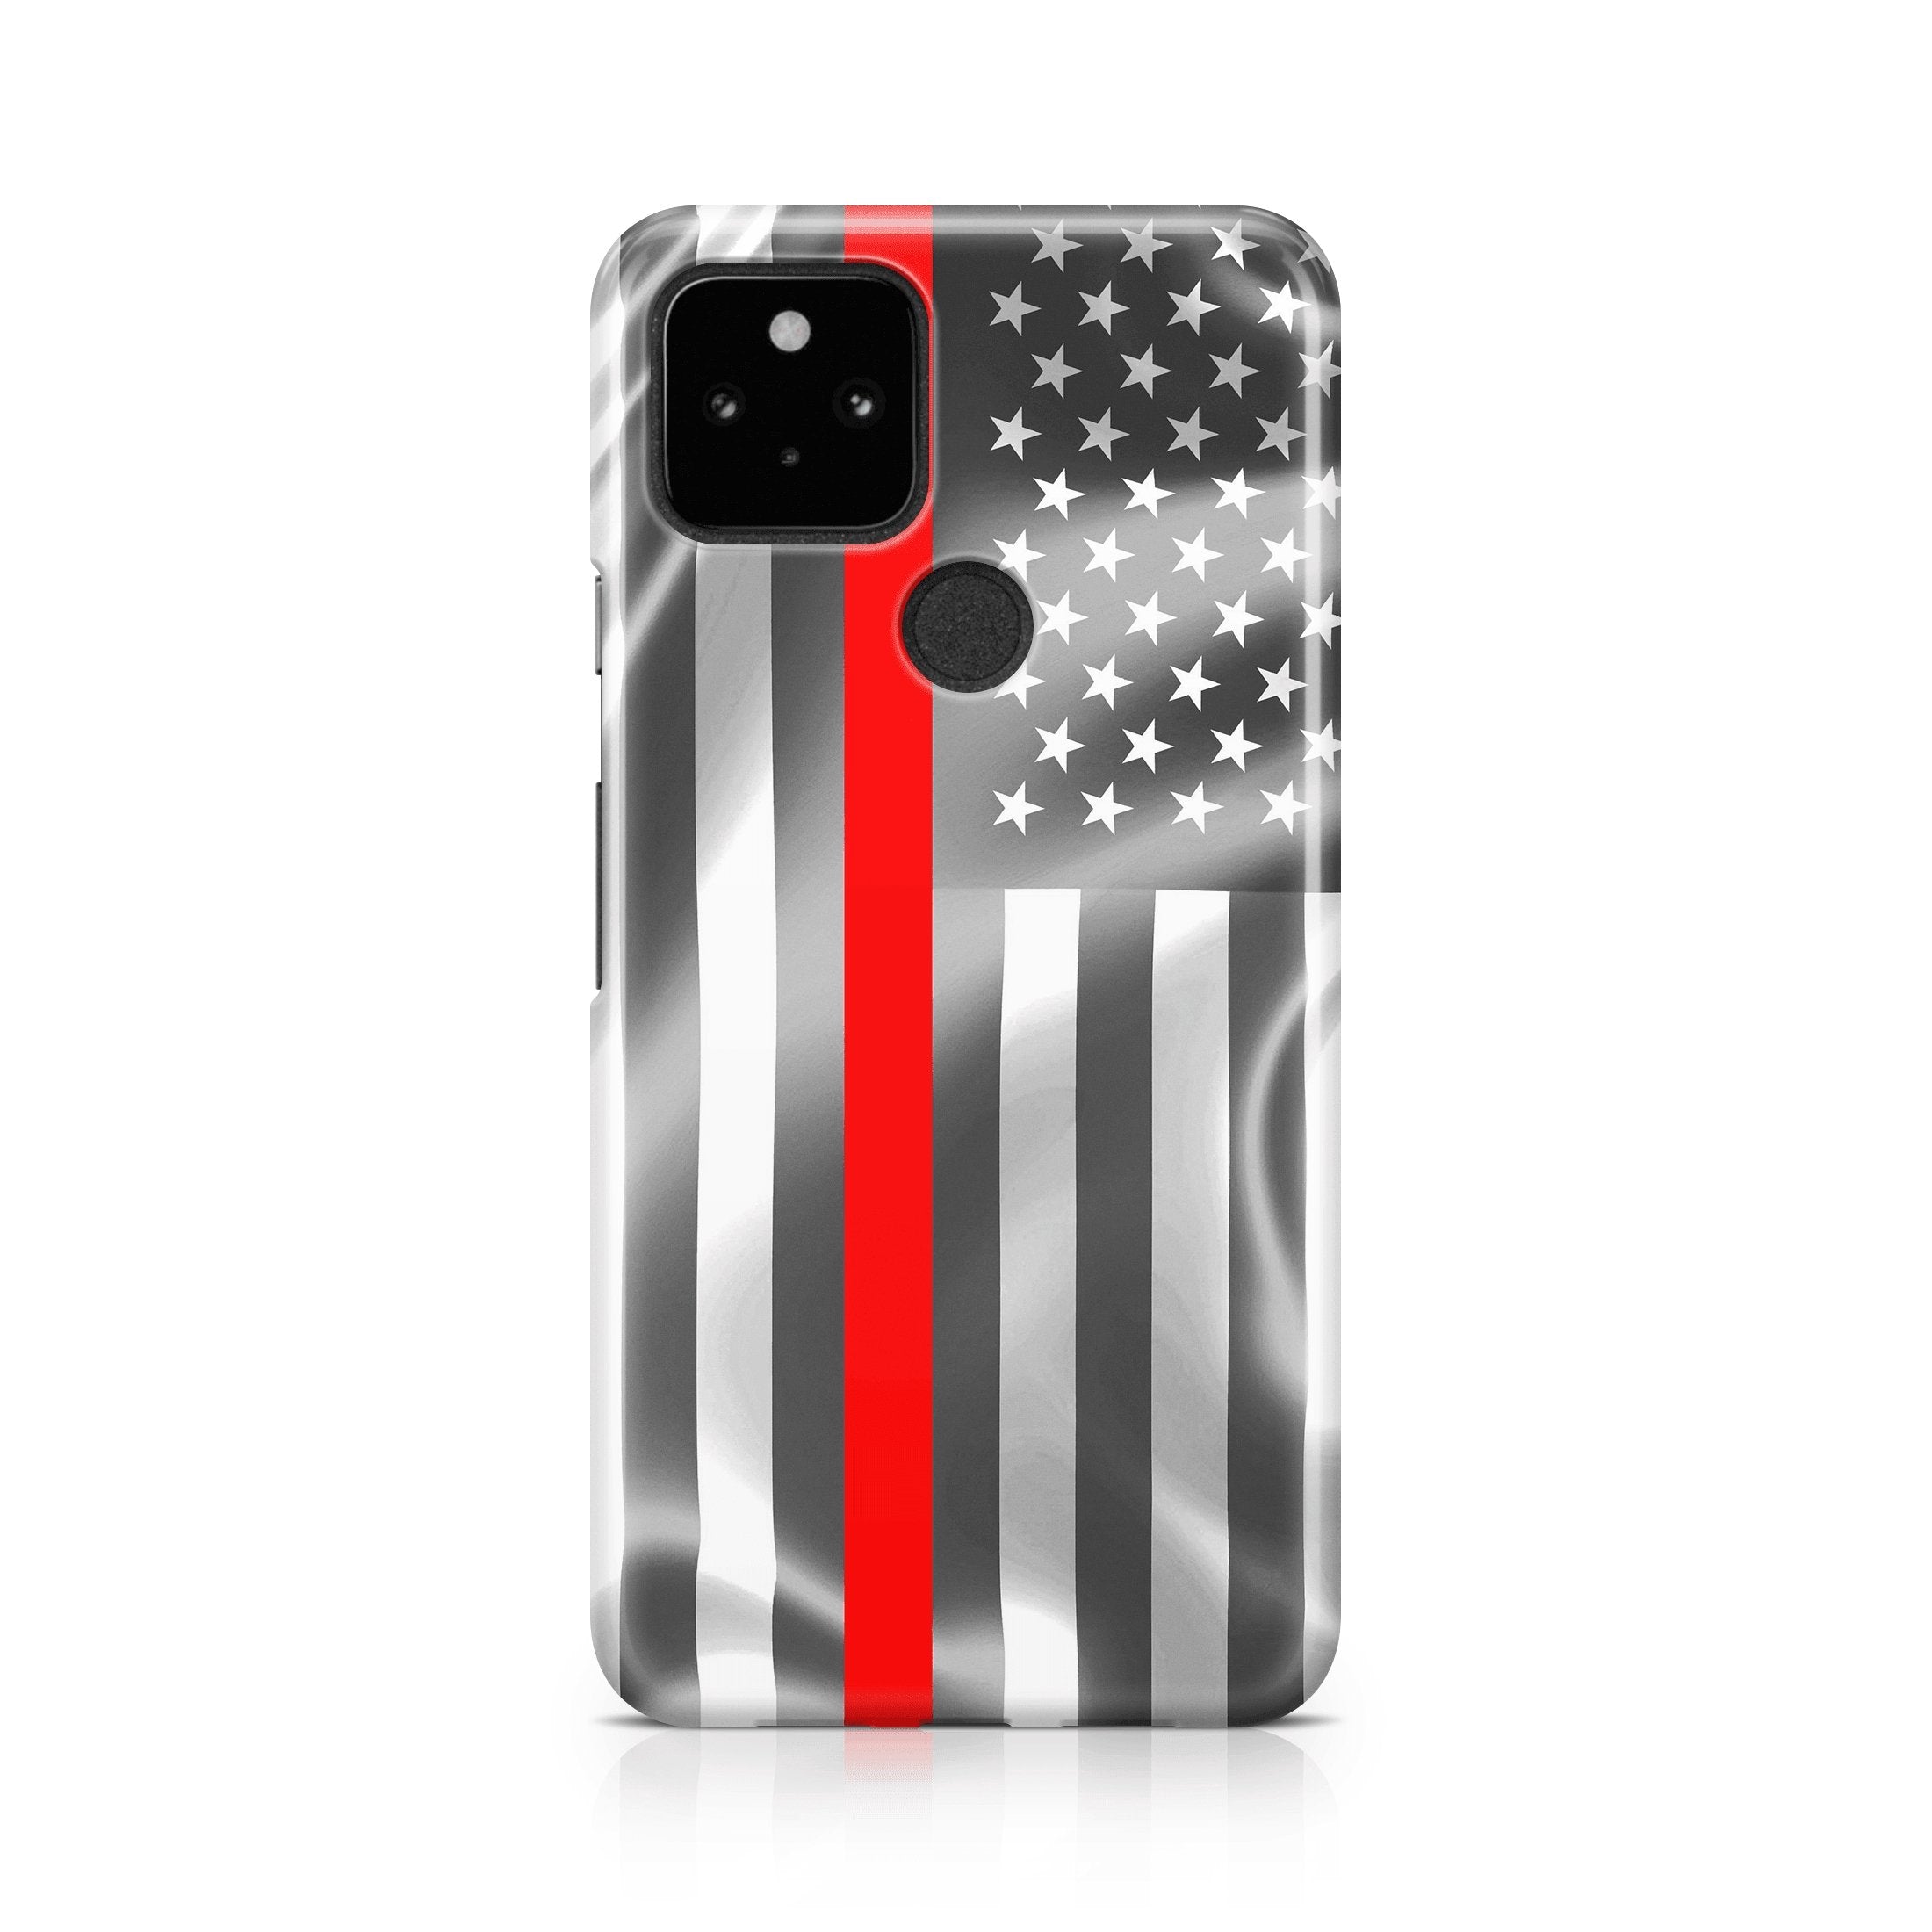 Thin Red Line - Google phone case designs by CaseSwagger